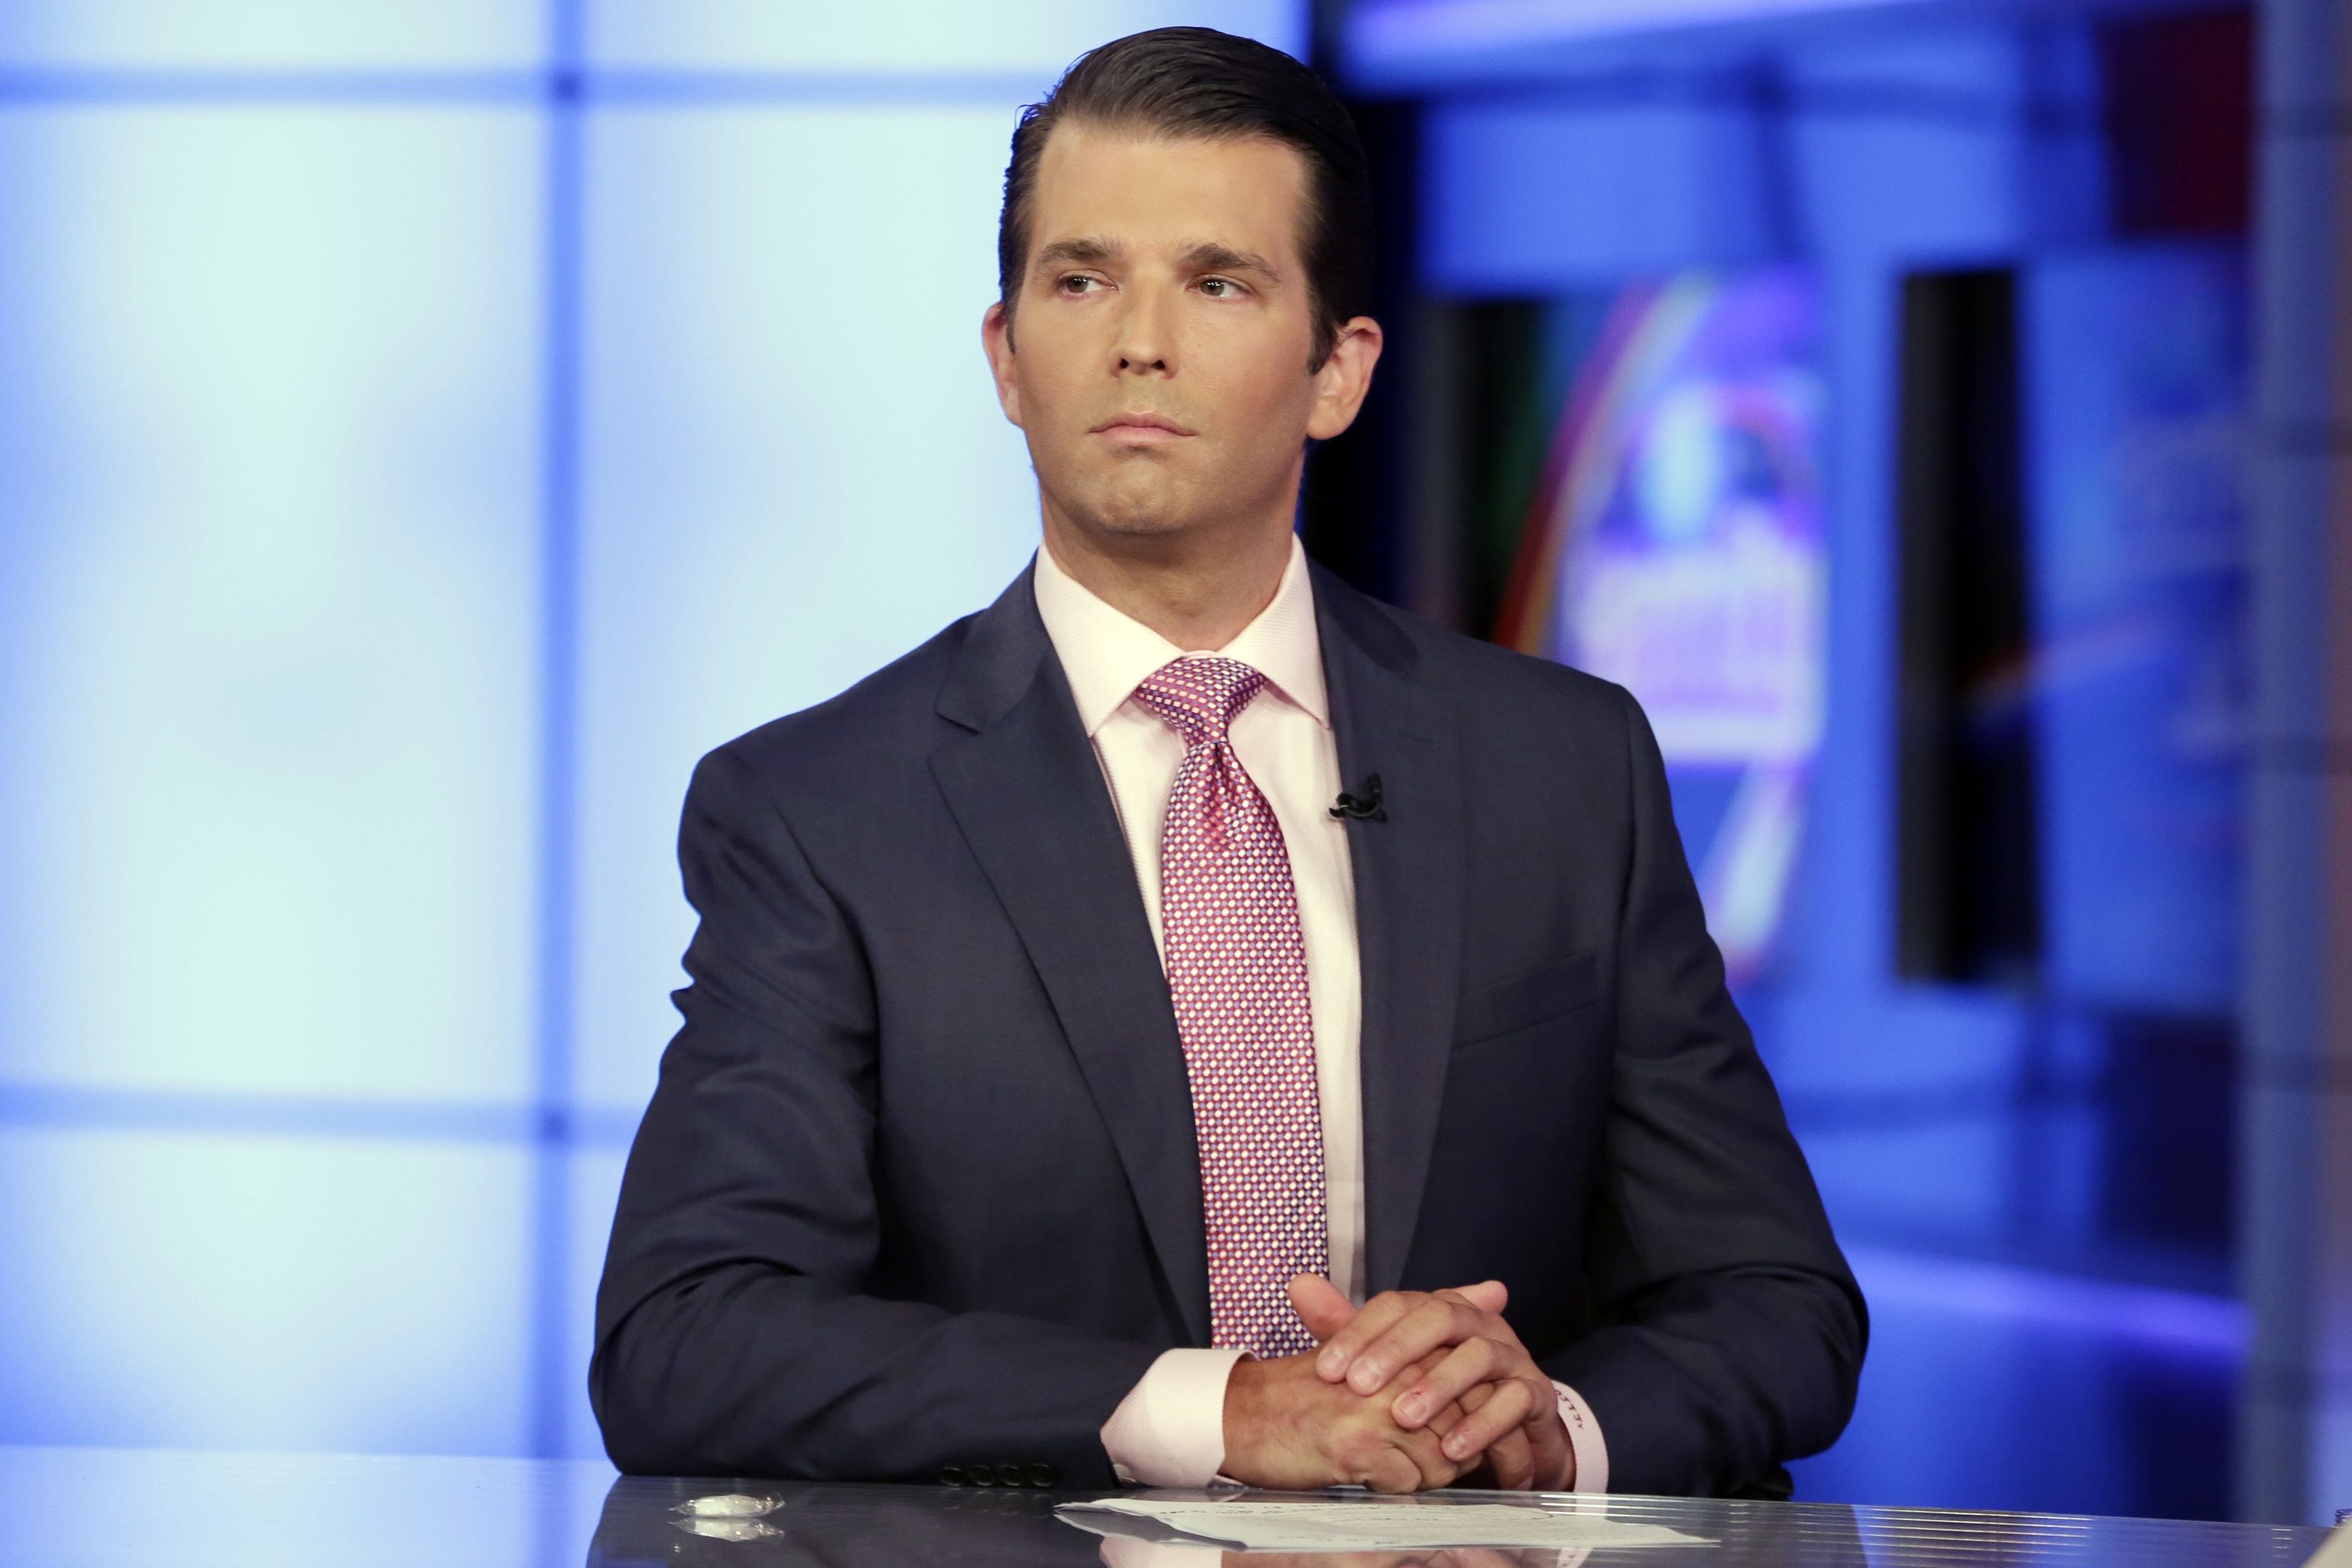 Donald Trump Jr. is interviewed by host Sean Hannity on his Fox News Channel television program, in New York